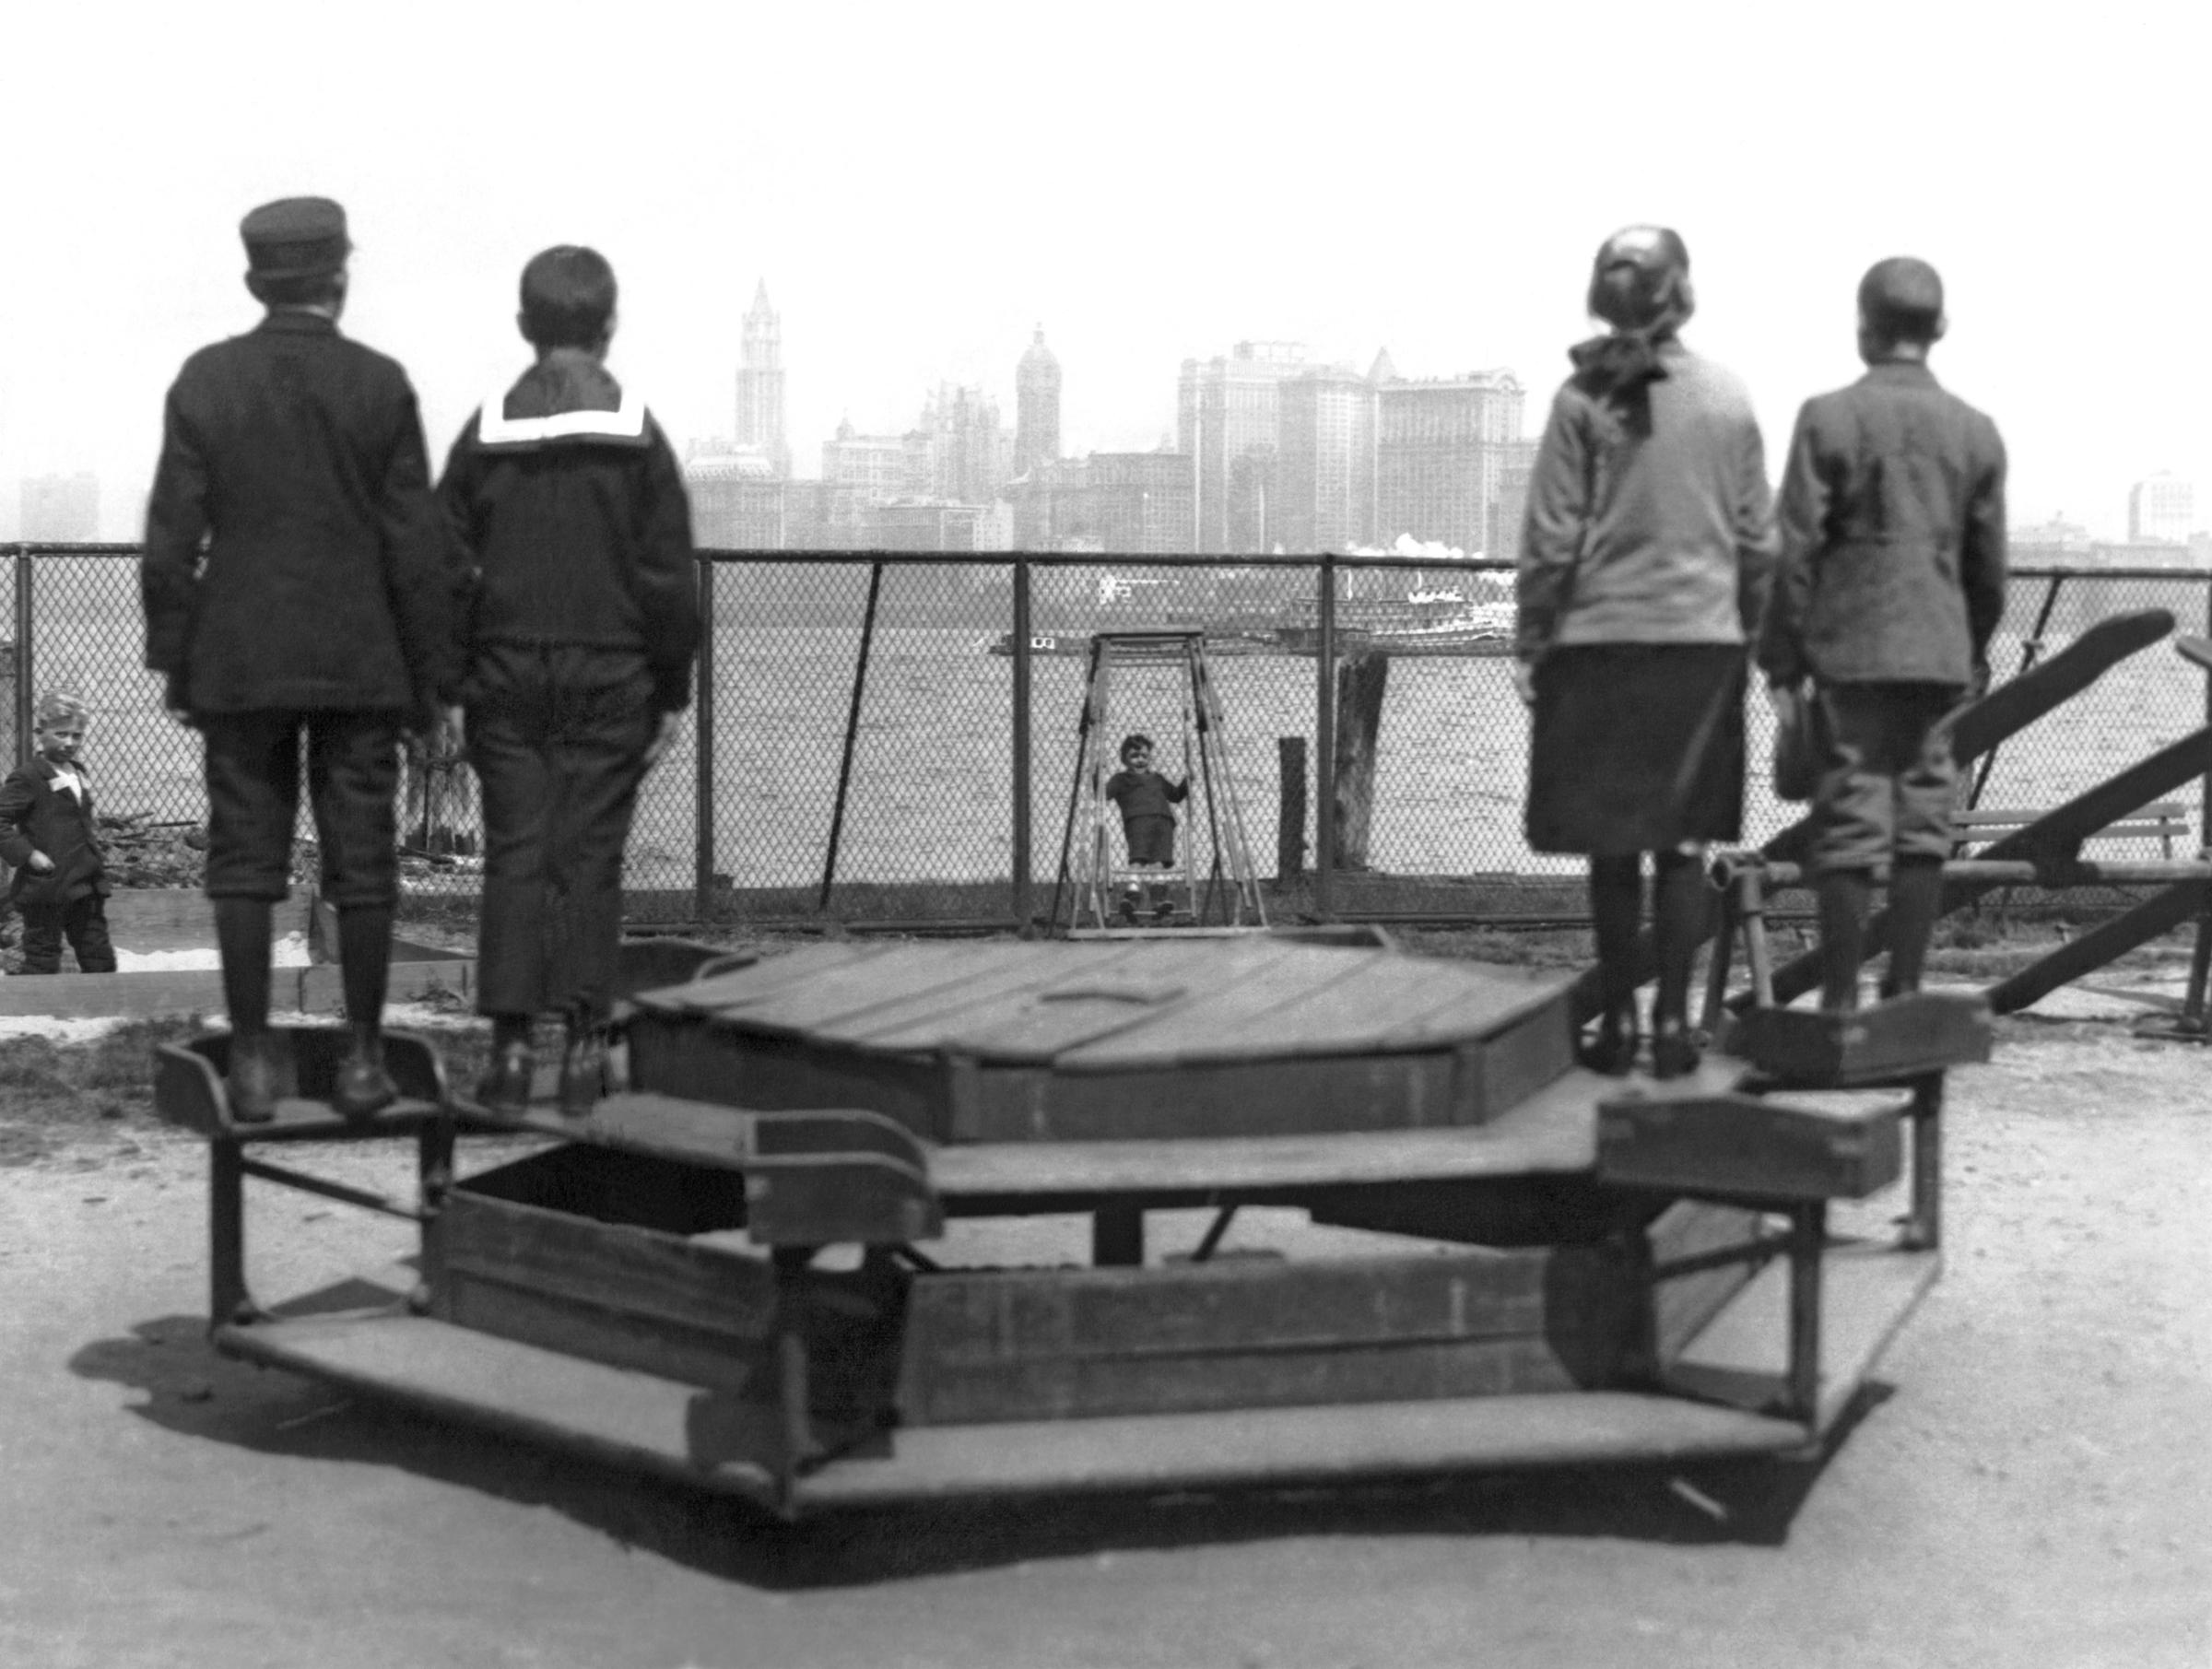 Immigrants representing four countries, Poland, Norway, Germany, and Russia, looking from Ellis Island towards New York City, circa 1913.